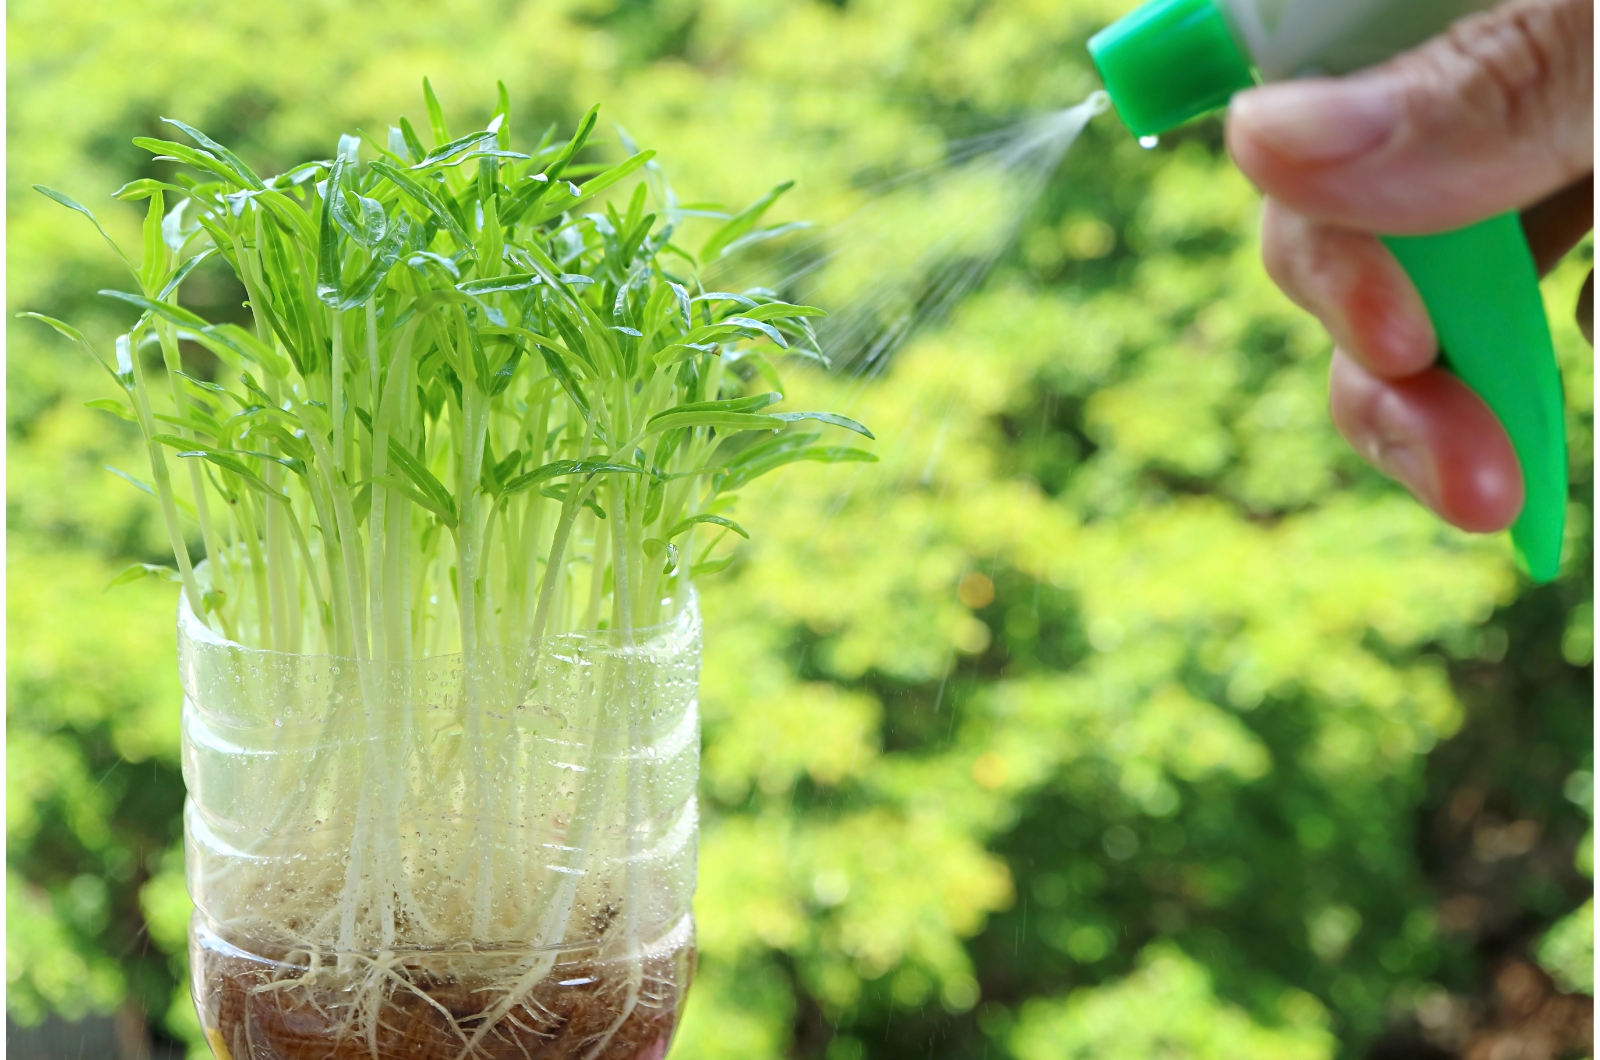 spraying water spinach sprouts